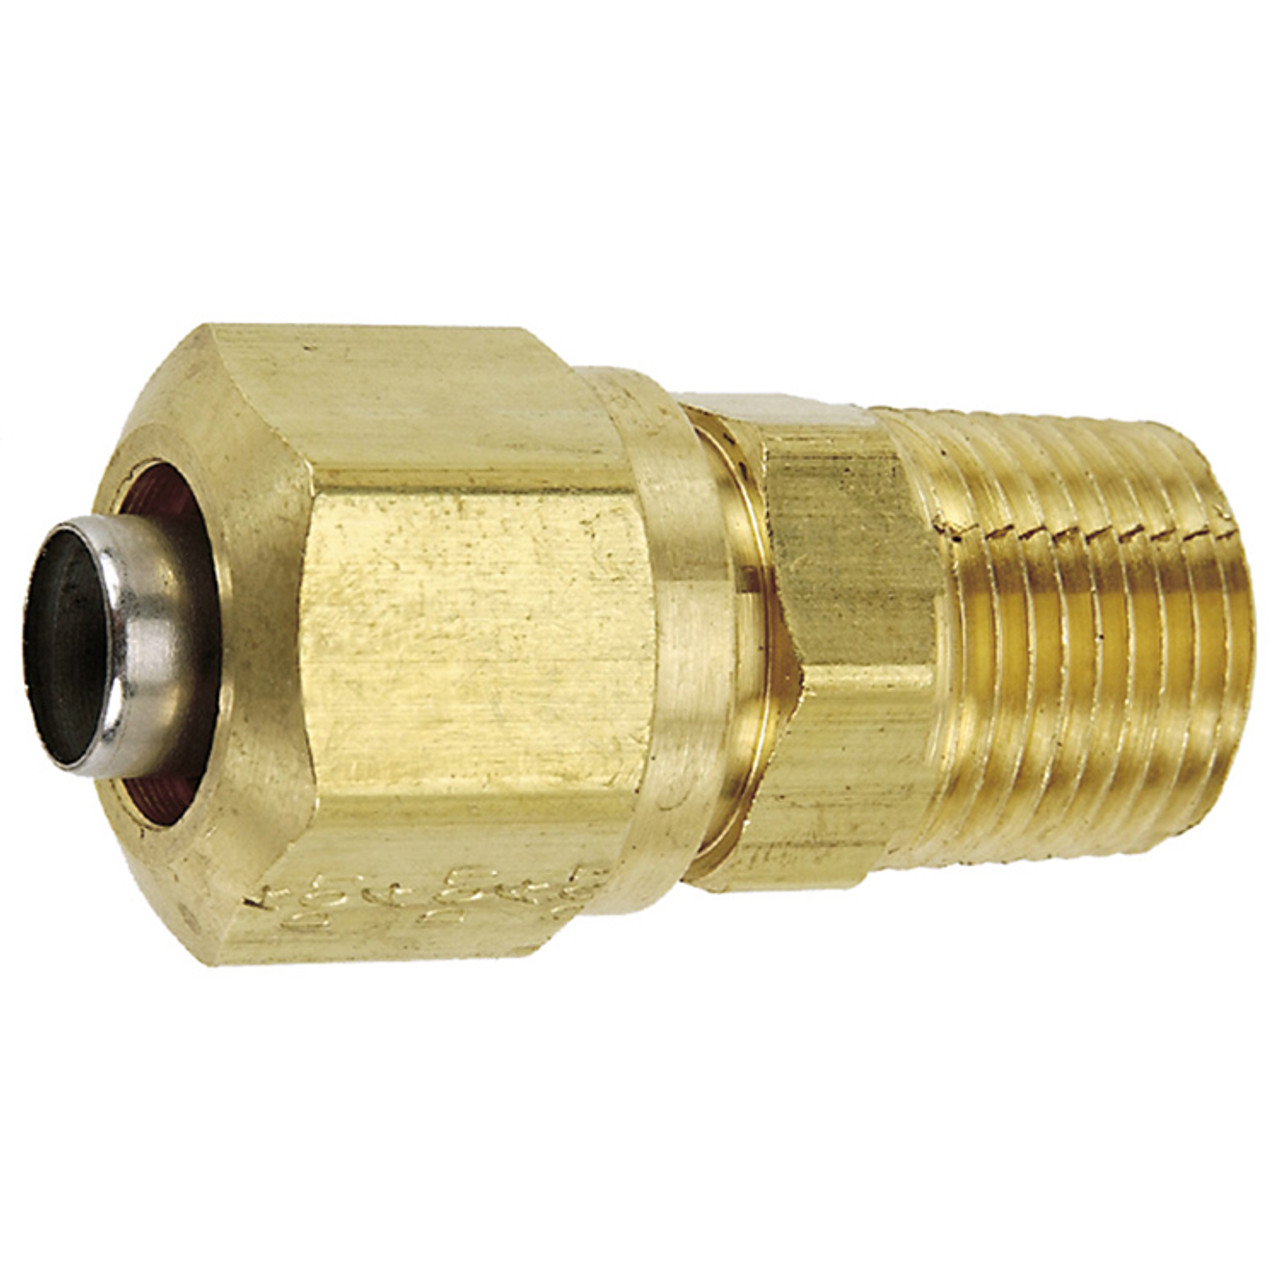 1/4 x 1/4" Brass DOT Male NPT - Compression Connector   G7016-04-04